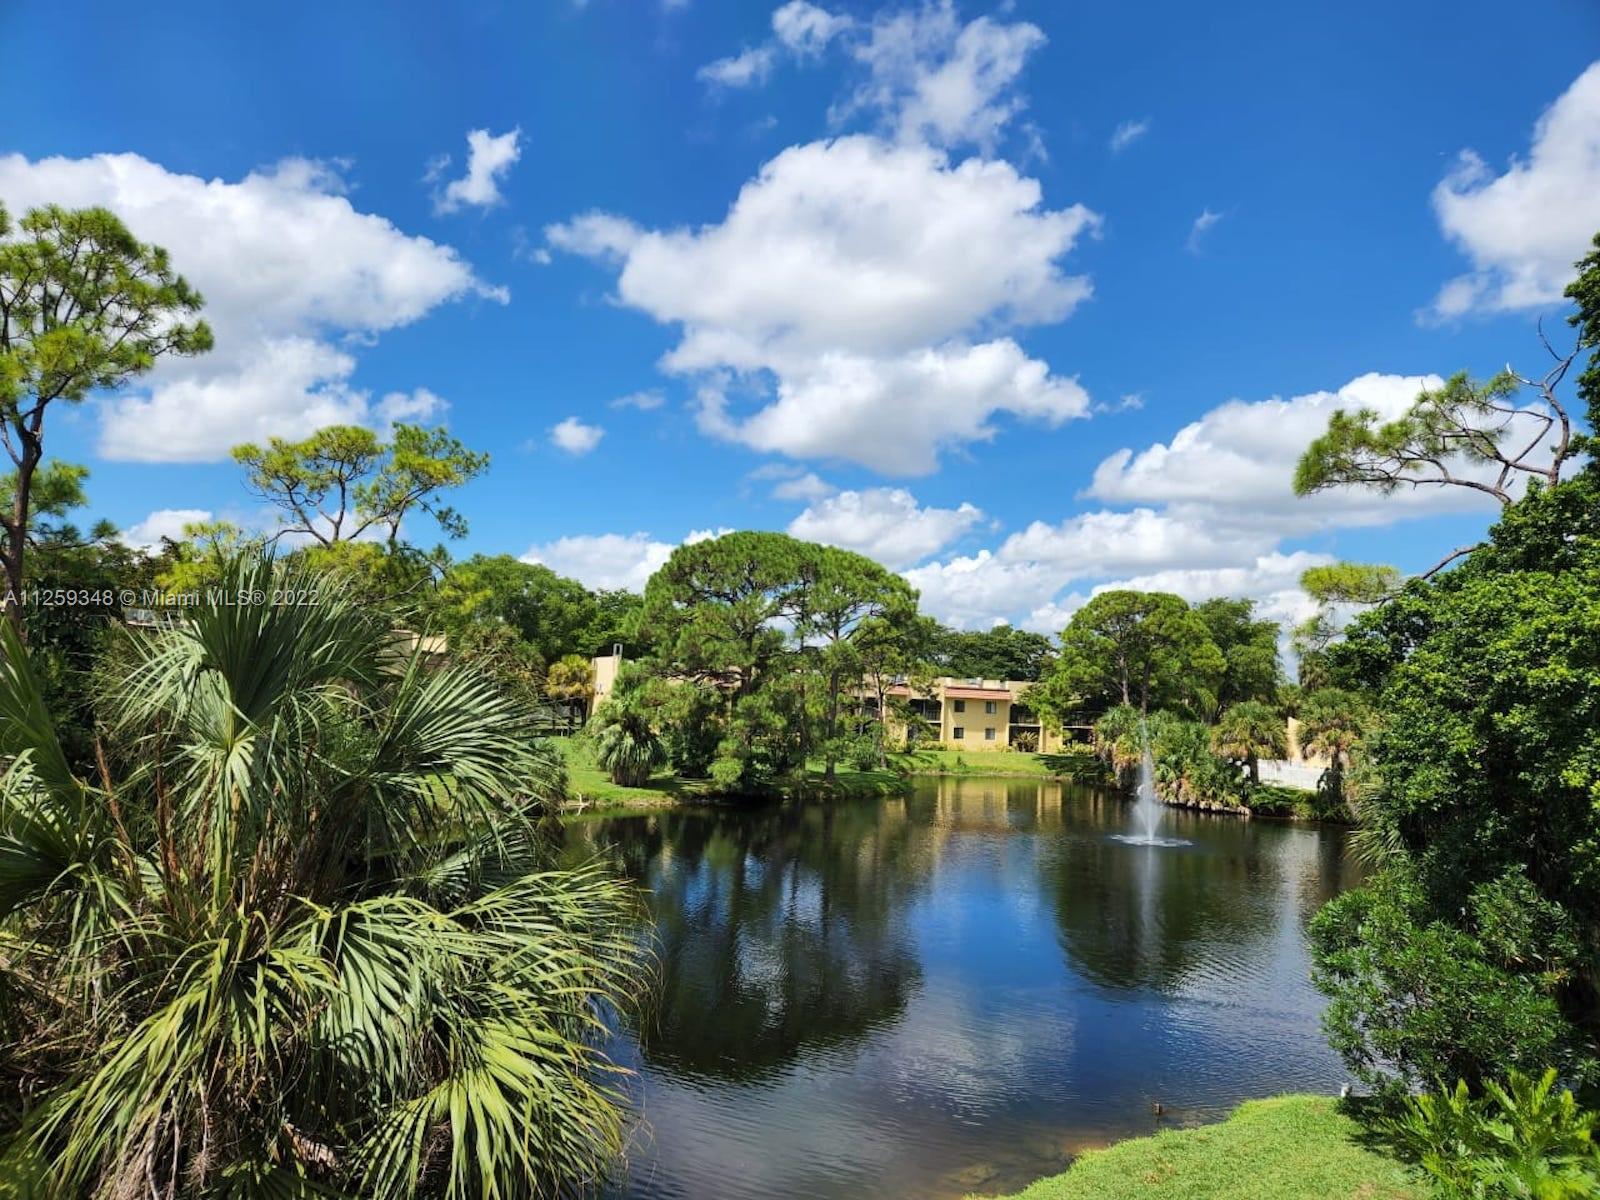 Great 2 Bedroom / 2 baths with stunning water views and lush greenery within the City of Boca Raton,